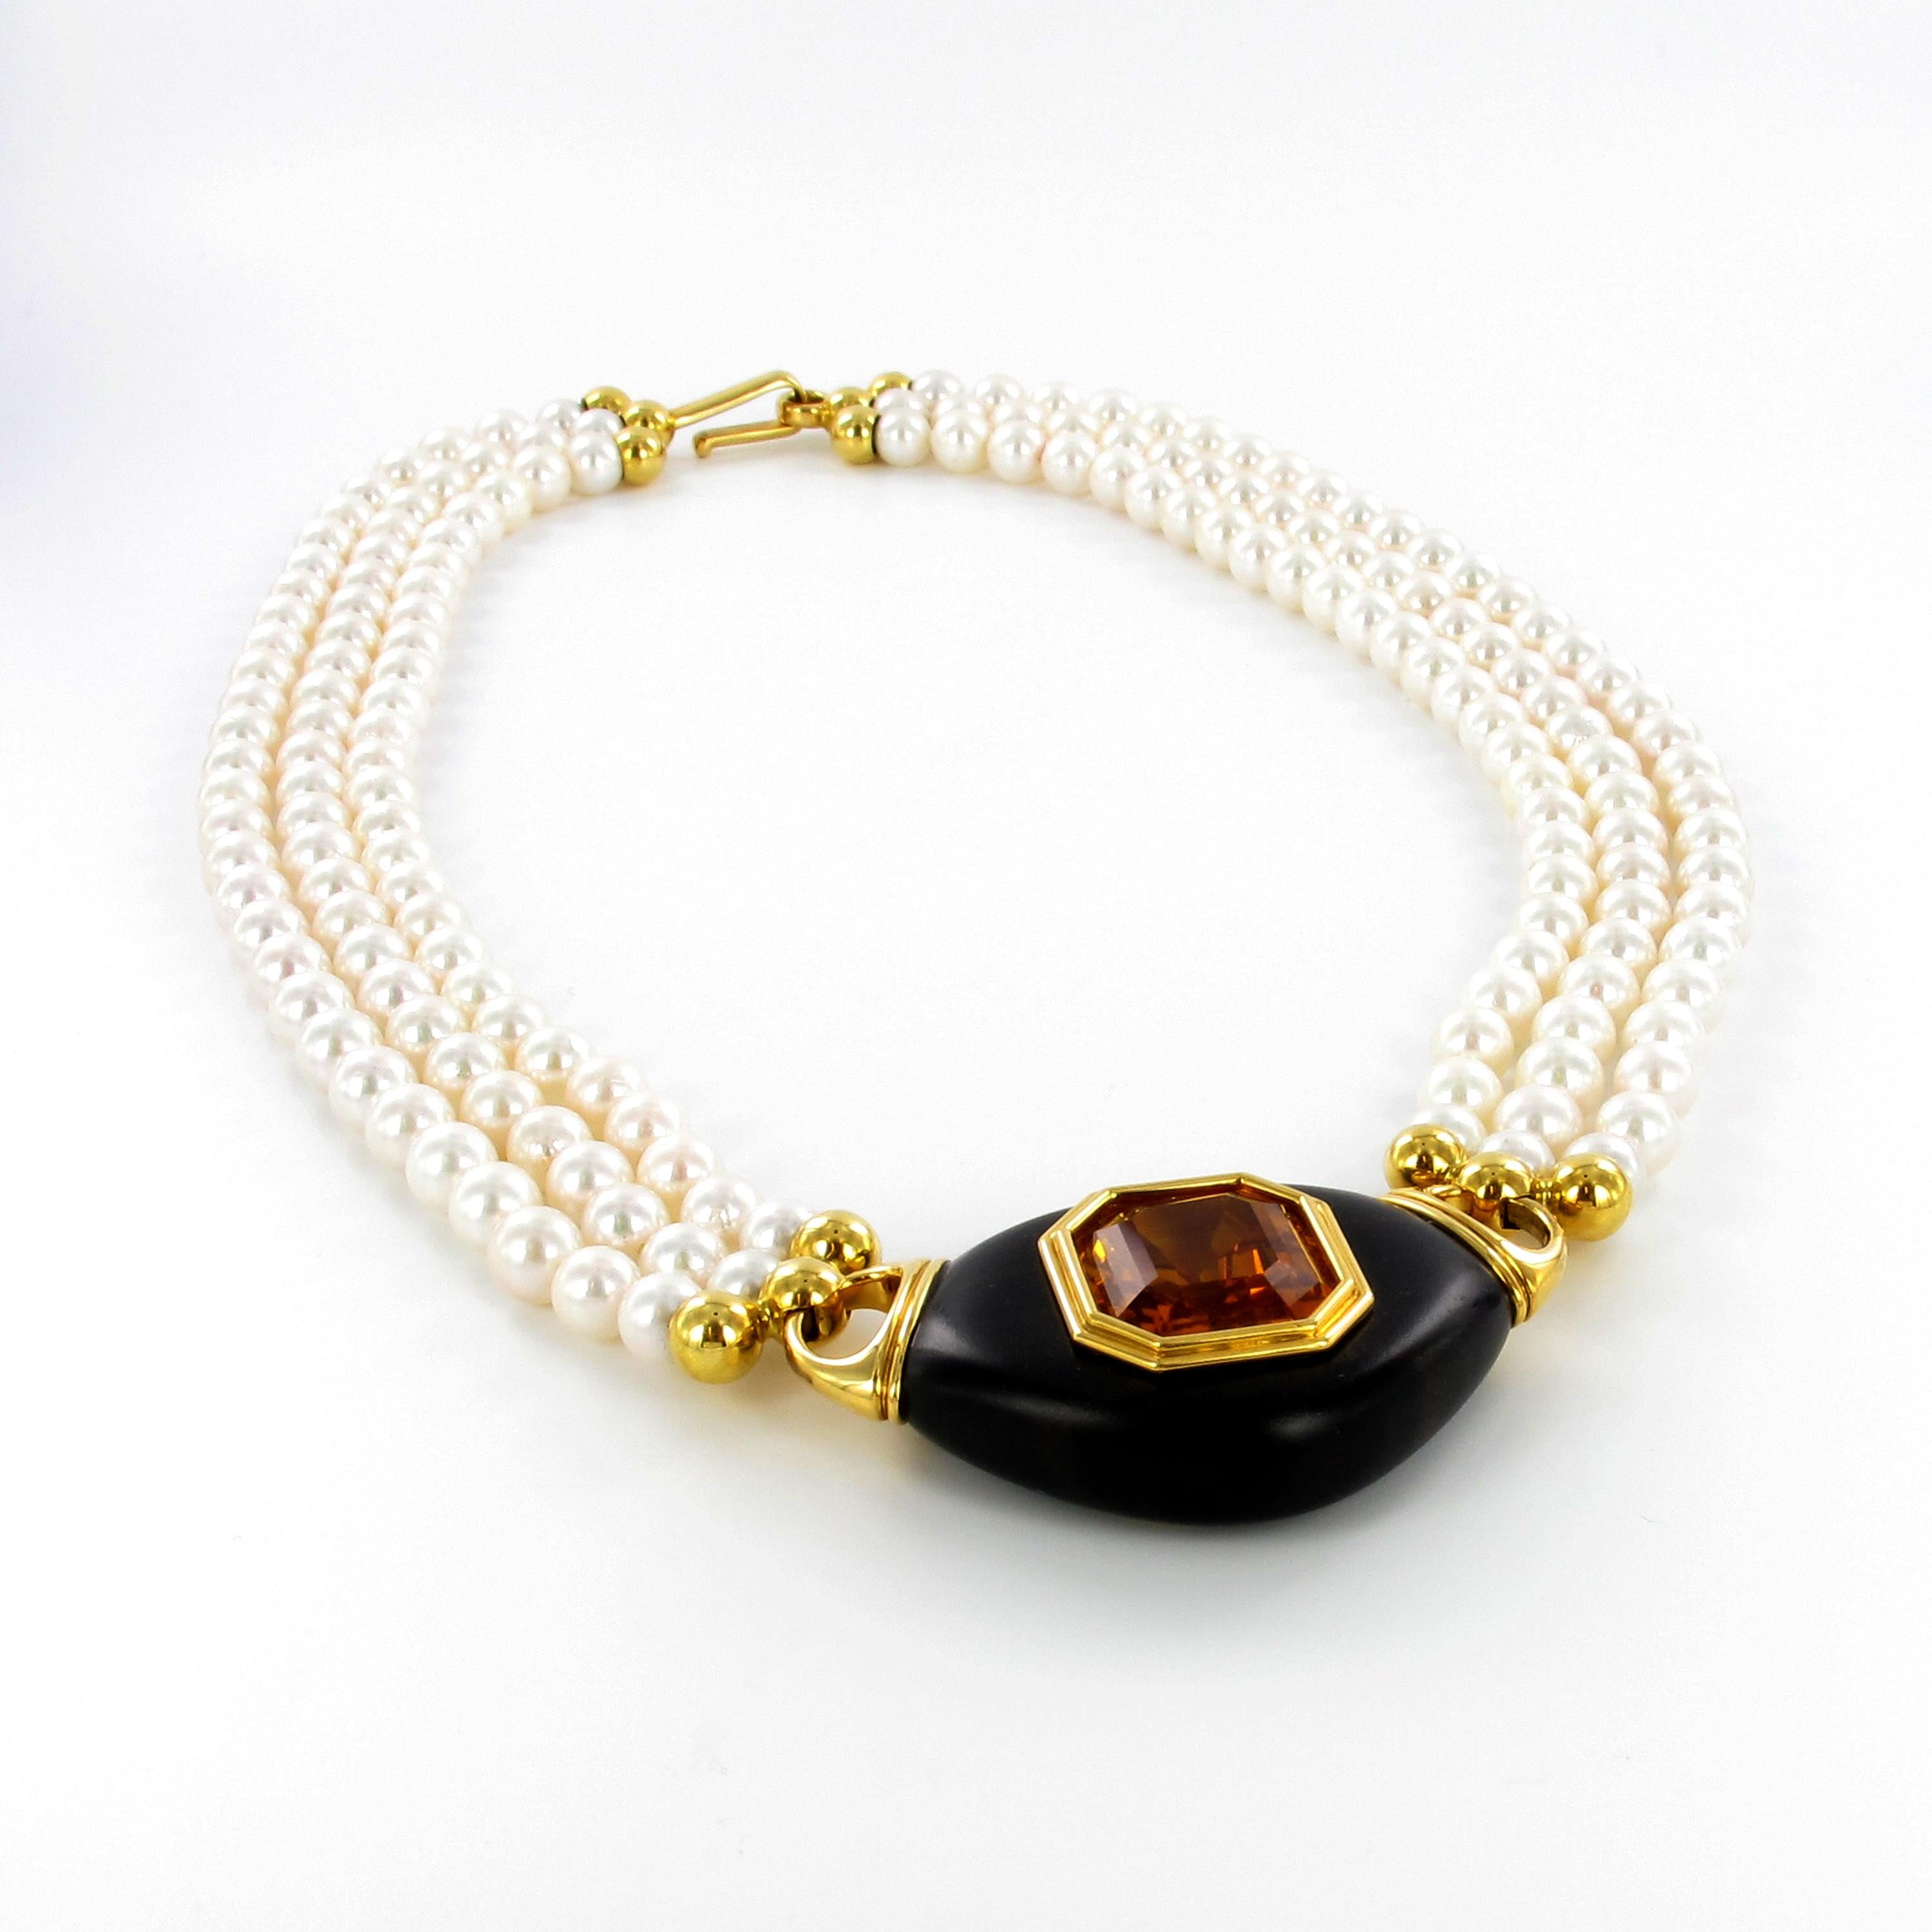 This exquisite and bold necklace features a 15.70 carats octagonal shaped citrine, bezel set in 18 karat yellow gold and placed into smoothly polished ebony. Attached to a three-strand necklace consisting of 172 round Akoya cultured pearls from 6.0